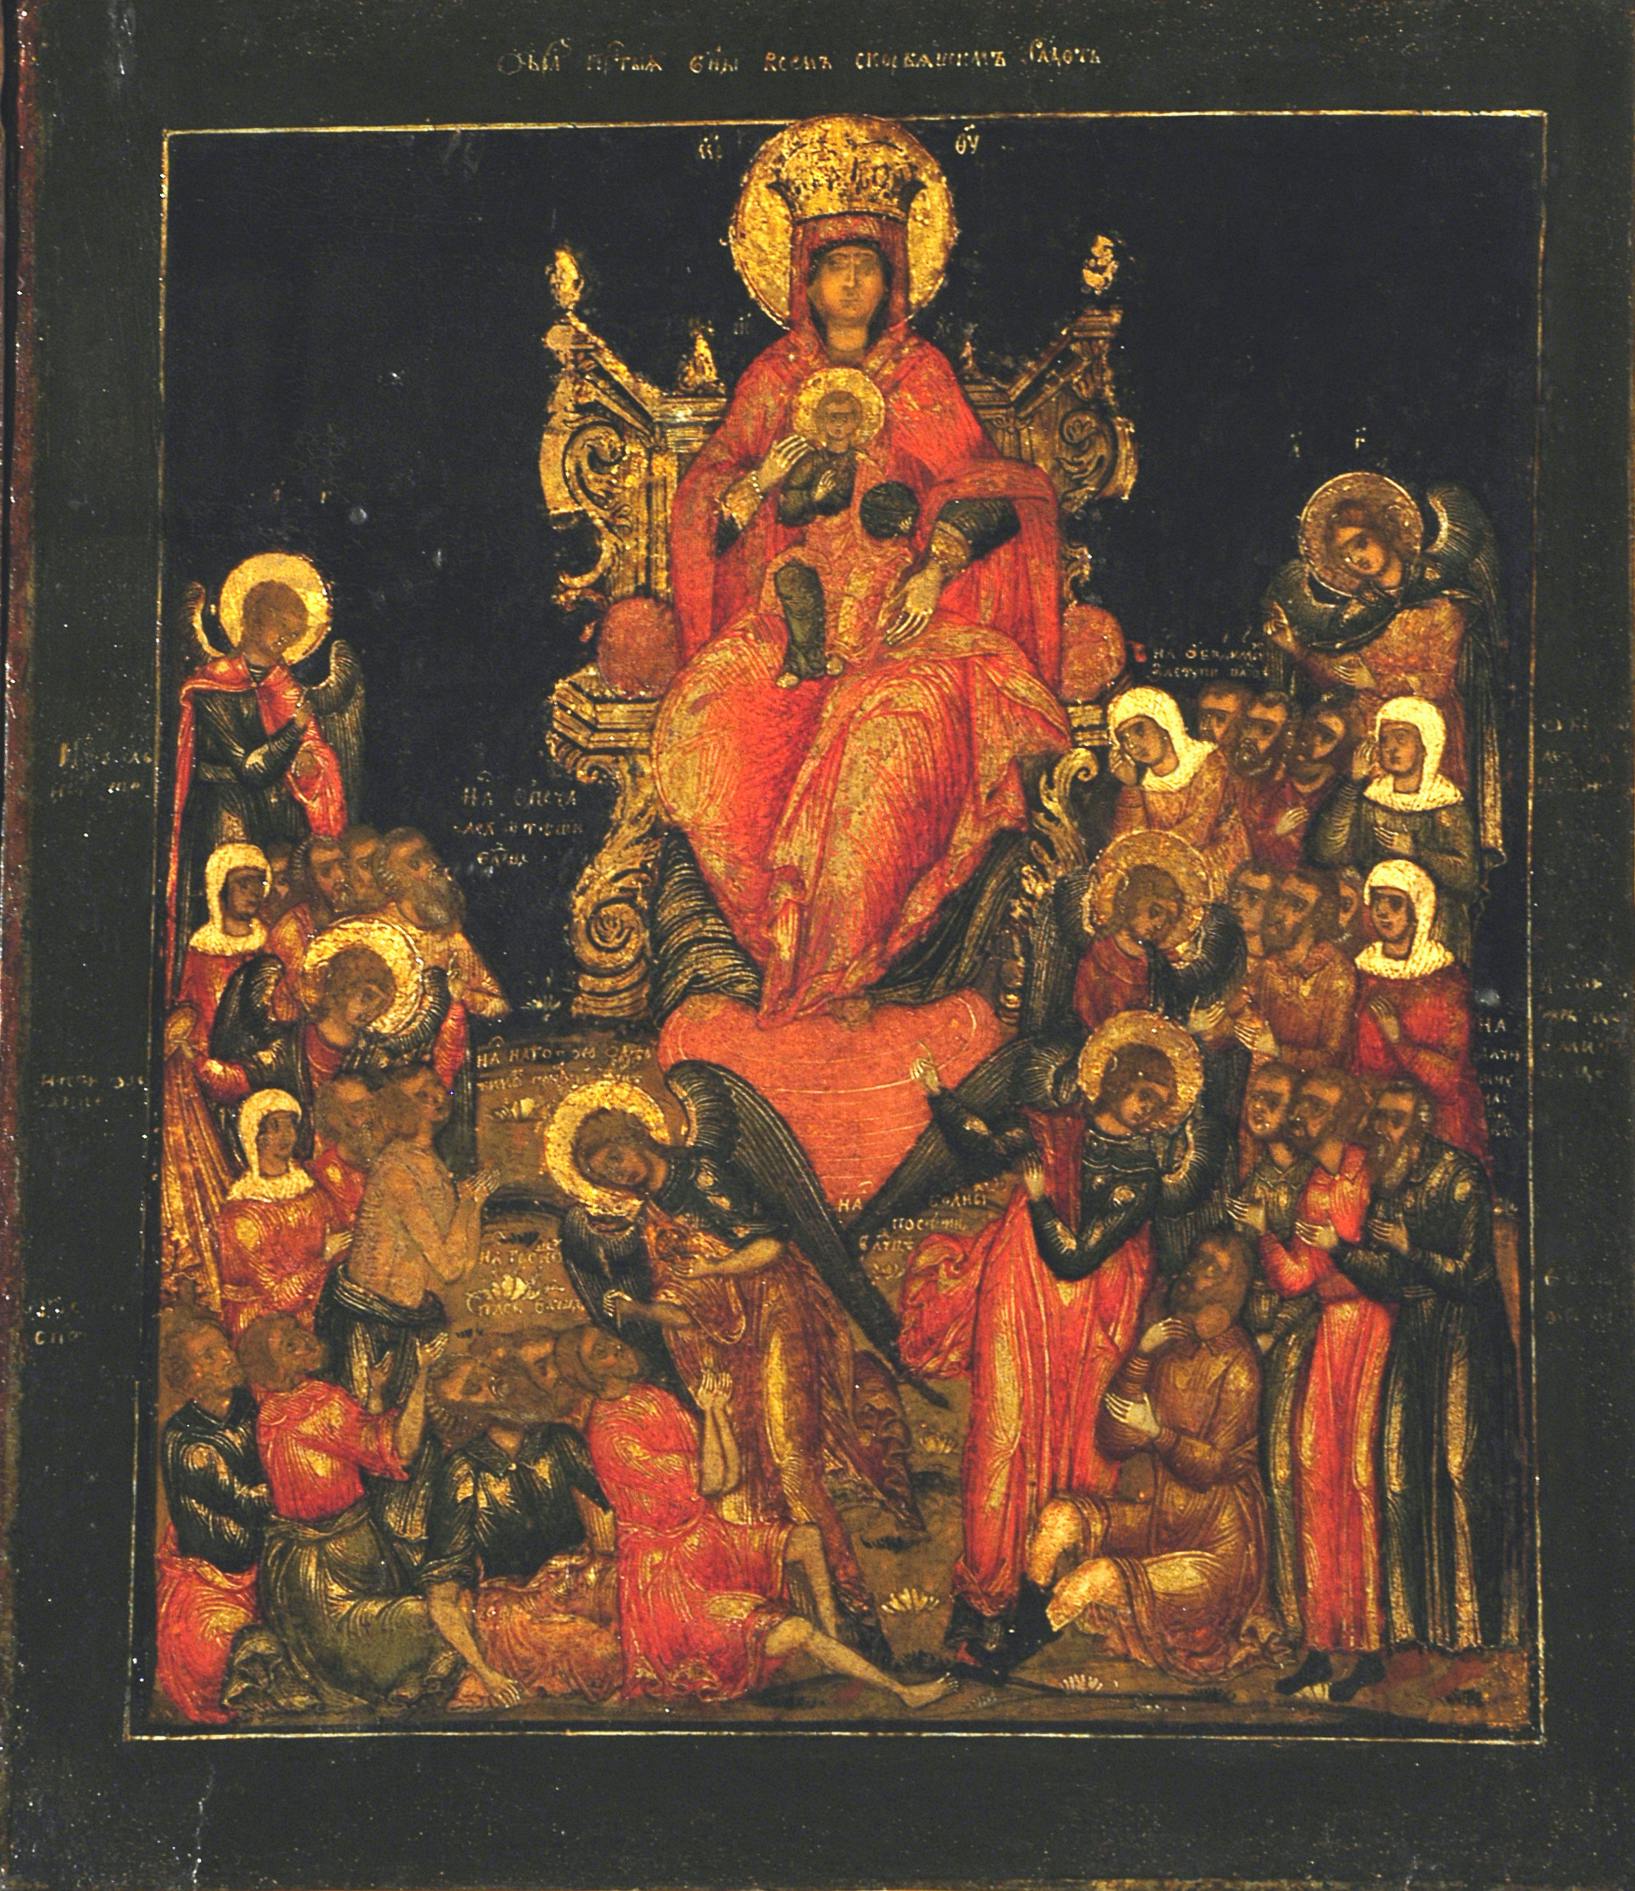 The Mother of God, Joy of all who sorrow (1890 no. 9367)